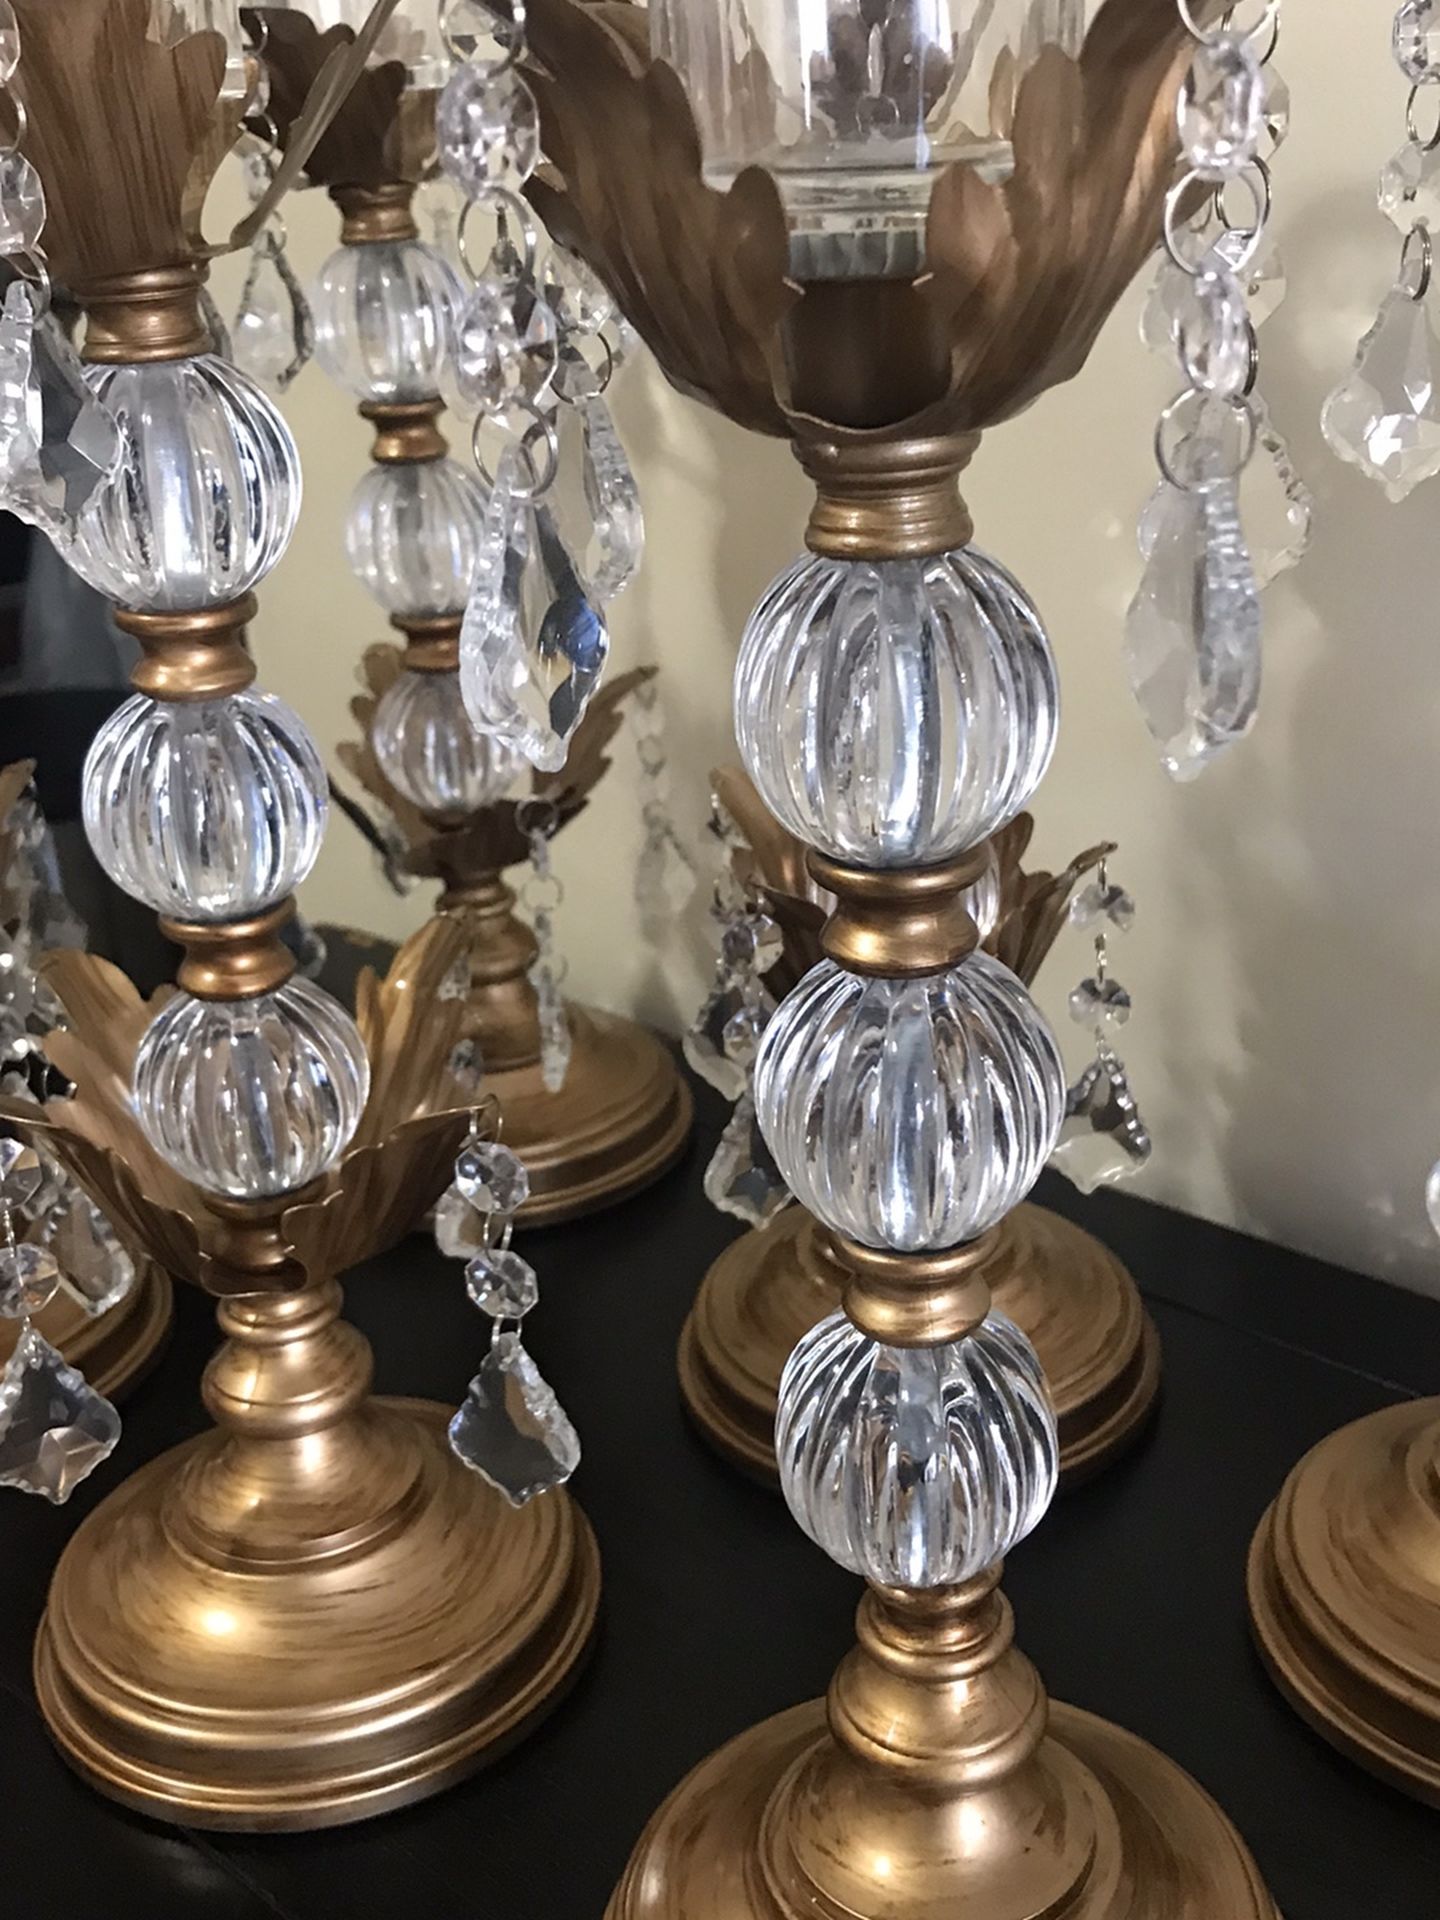 Available 6 Candle Holders 14” Tall For $20 Each Retail $25 Buy More Save More Pick Up Gaithersburg Md20877